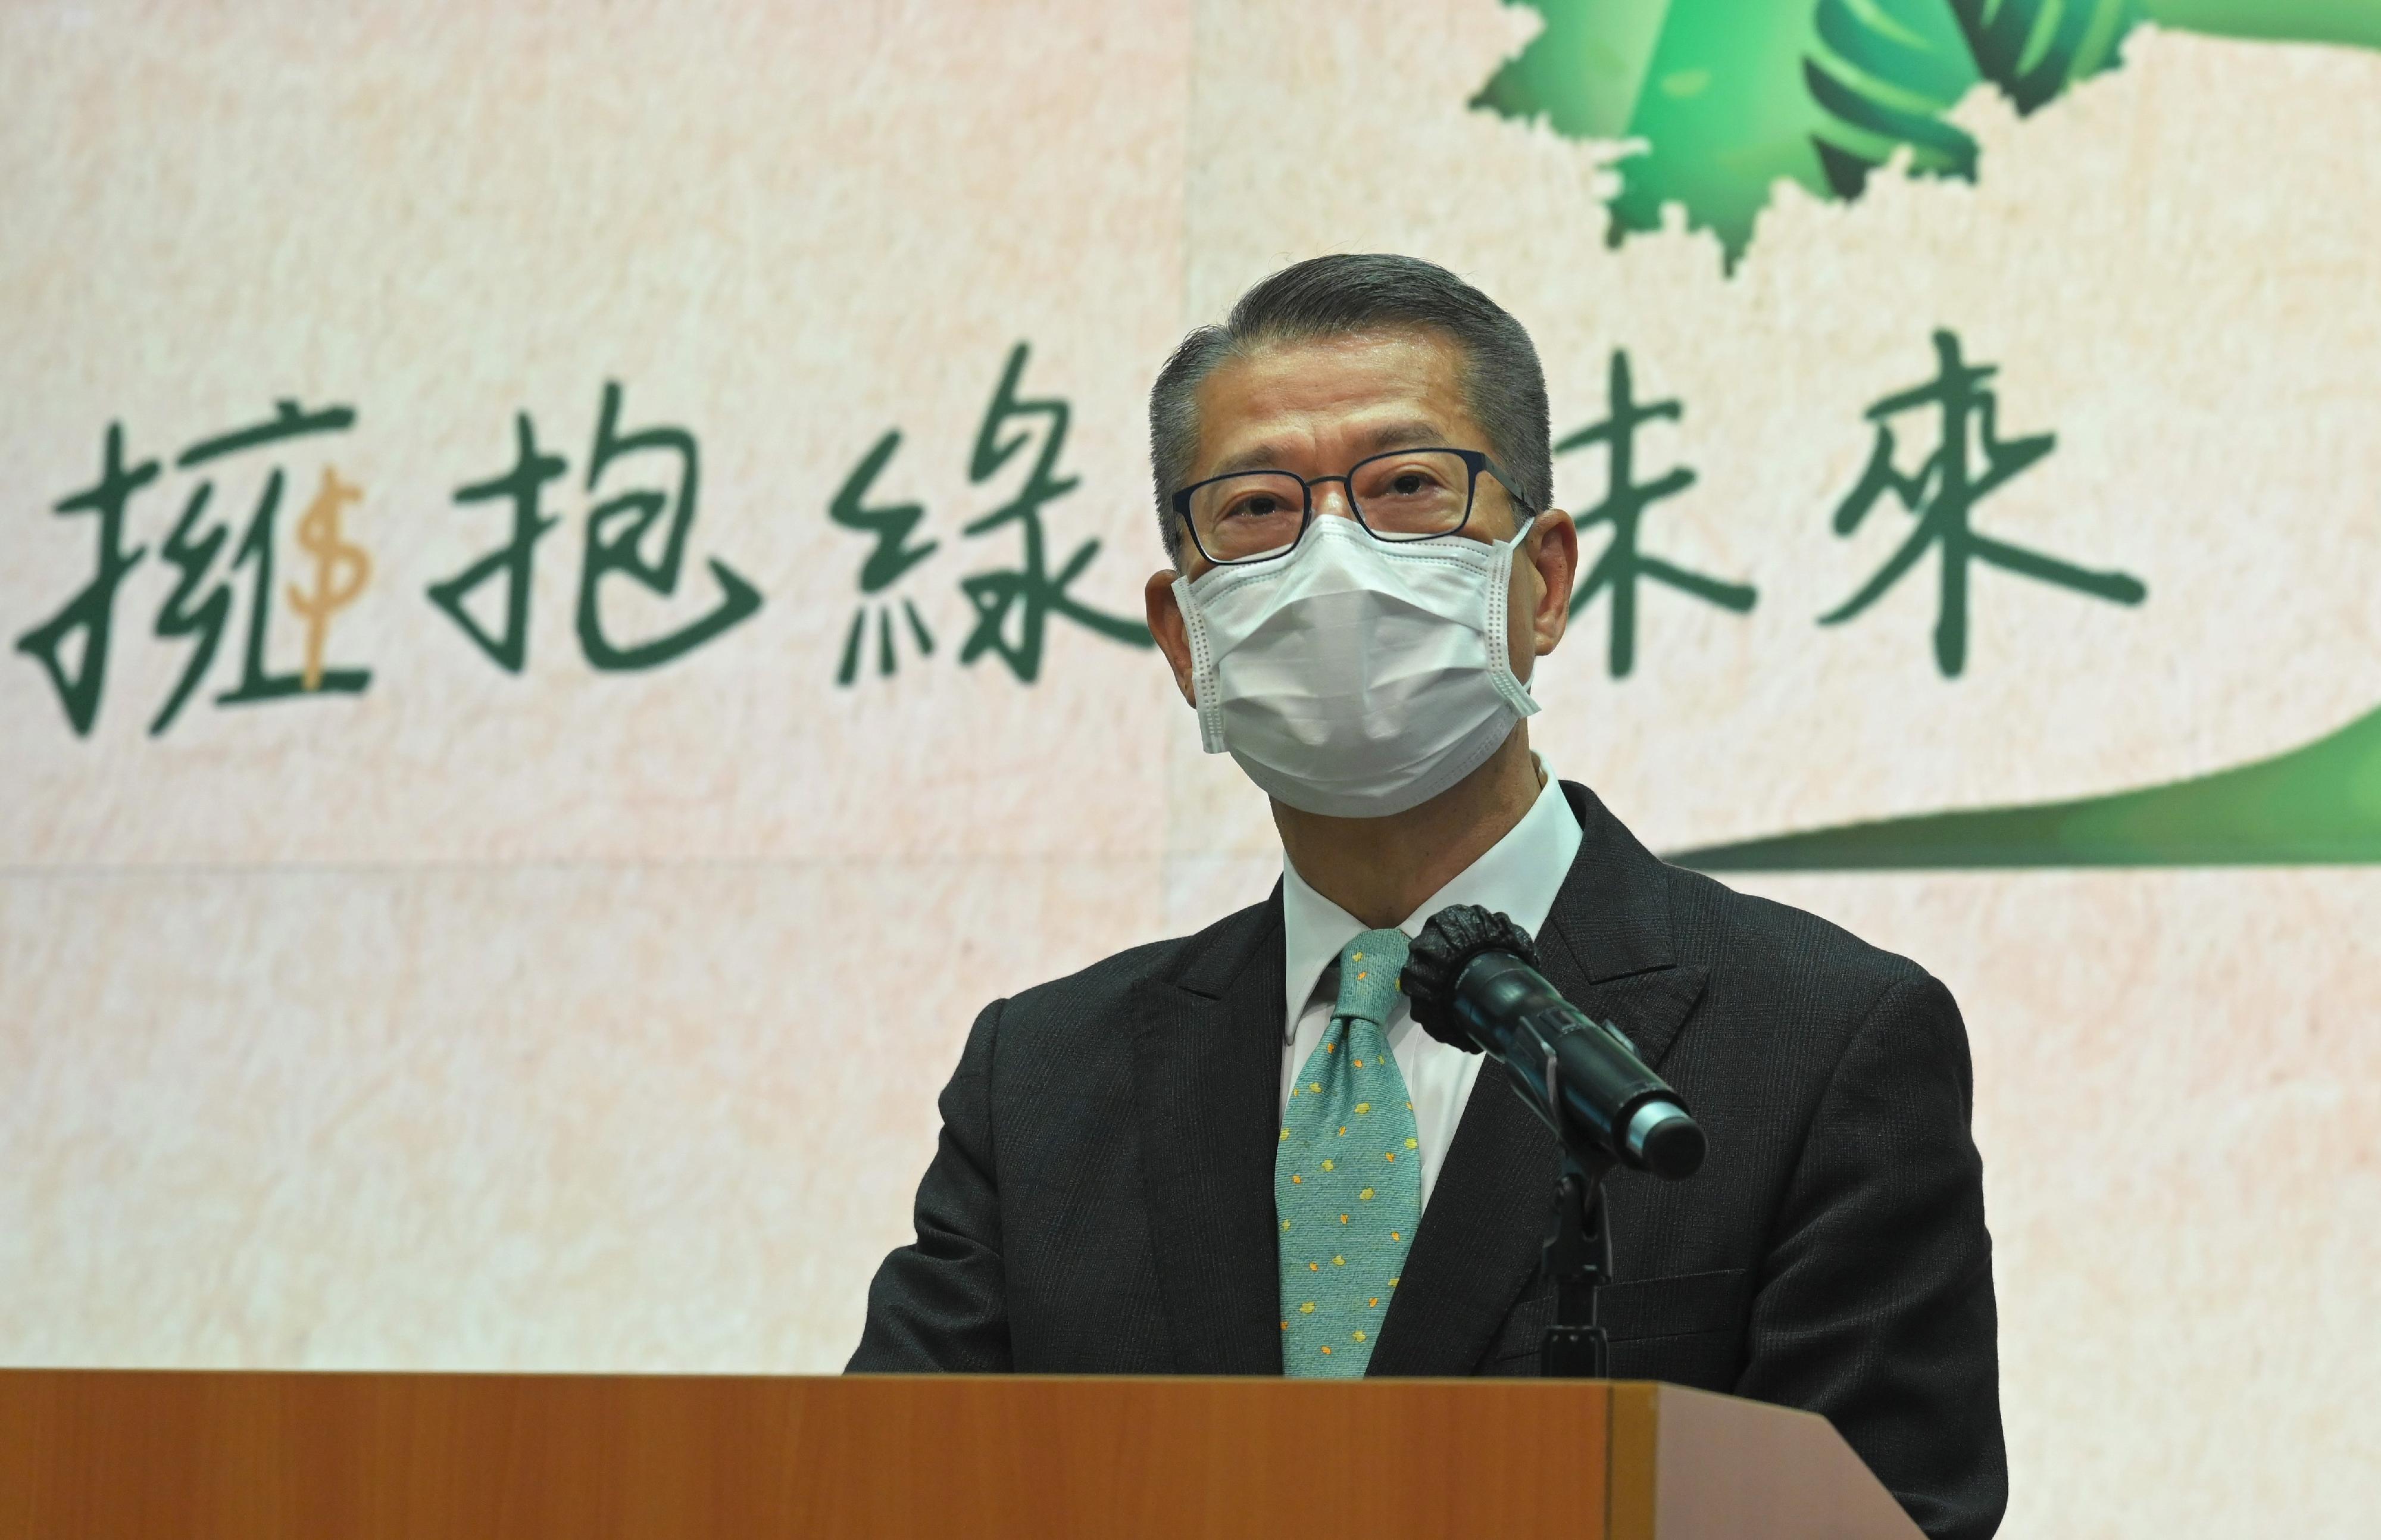 The Financial Secretary, Mr Paul Chan, said at a press conference today (February 15) that issuance of retail green bond can allow residents to directly contribute to greening Hong Kong and share the fruit of the sustainable development of Hong Kong through participating in the green and sustainable finance market.